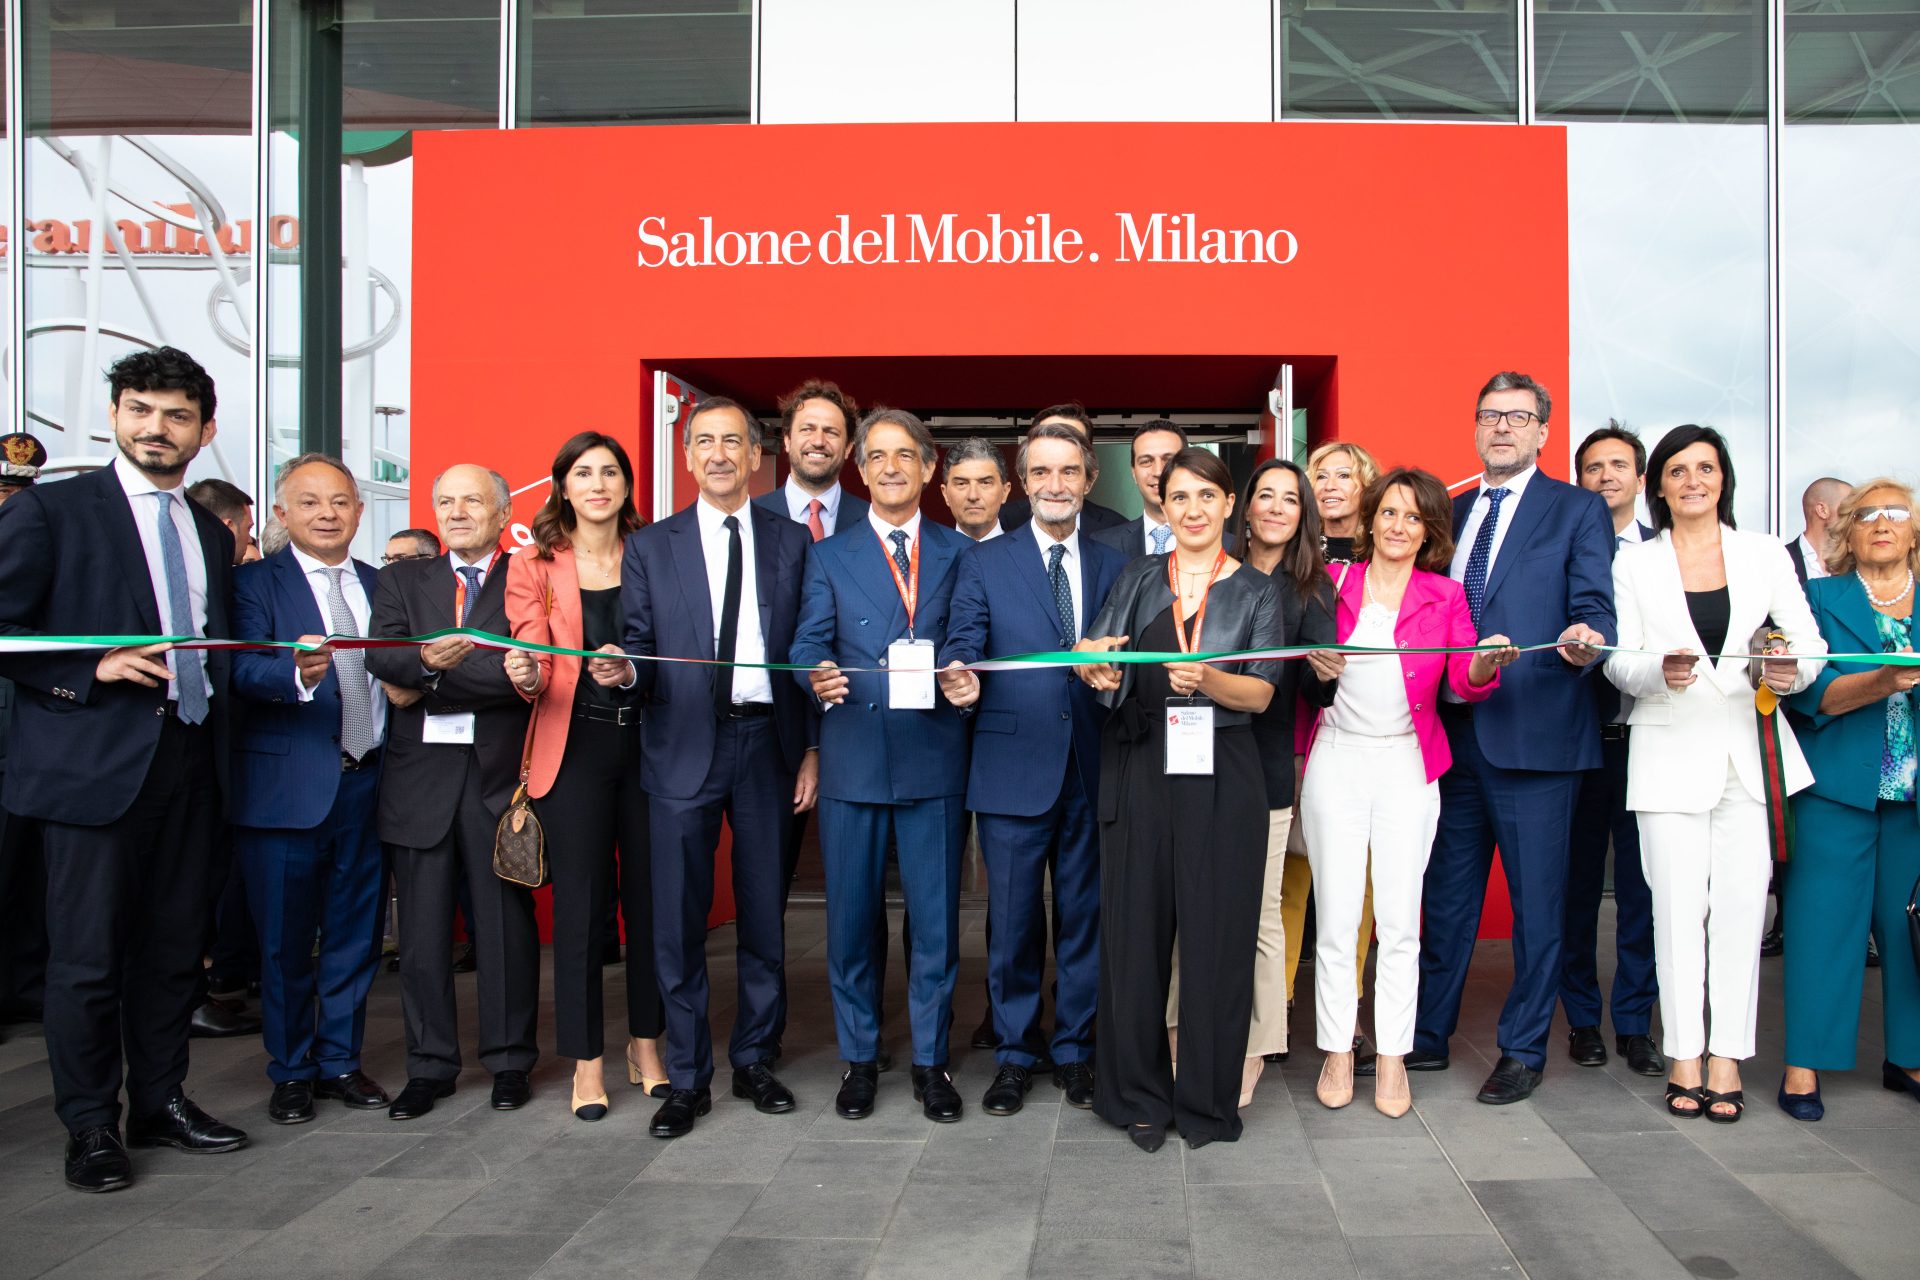 The Salone del Mobile 2022 explained by President Maria Porro